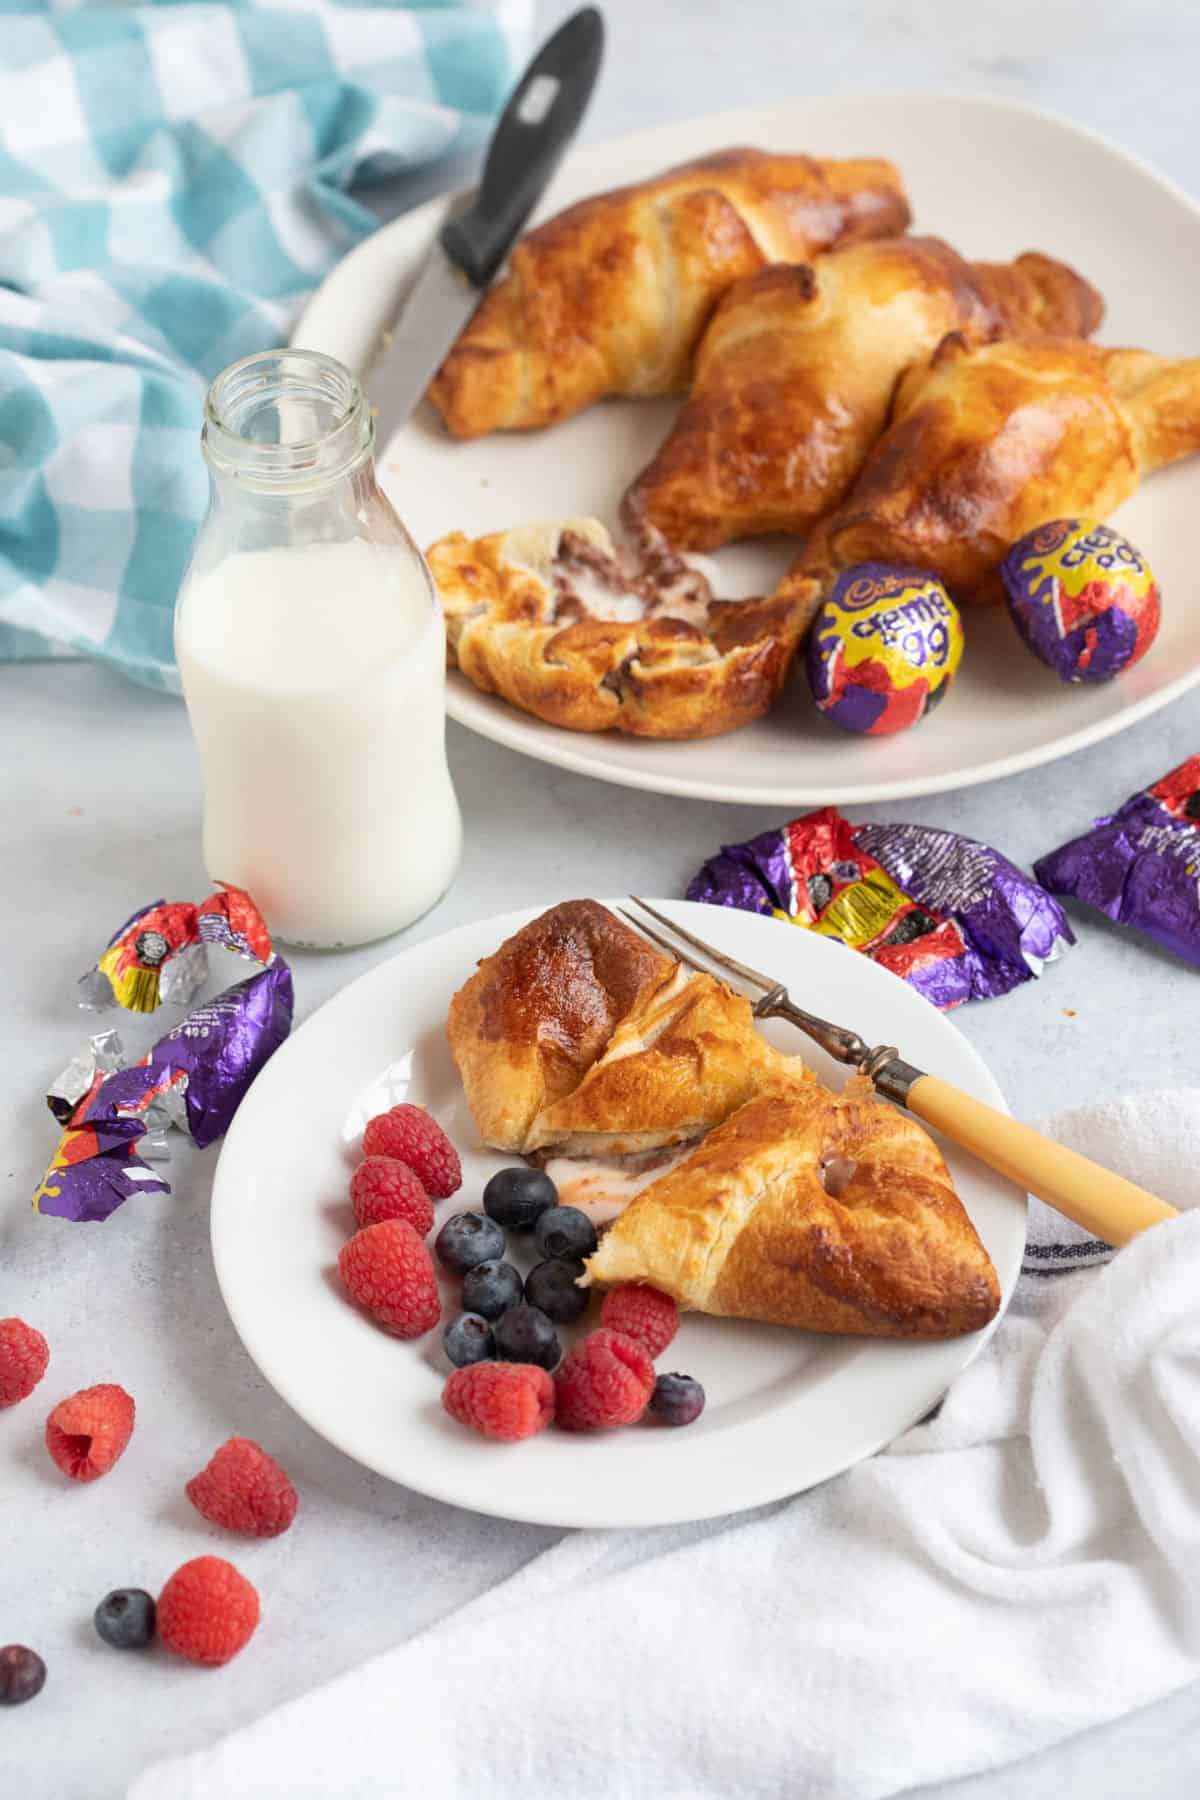 Creme egg croissants with fresh berries and a glass of milk.